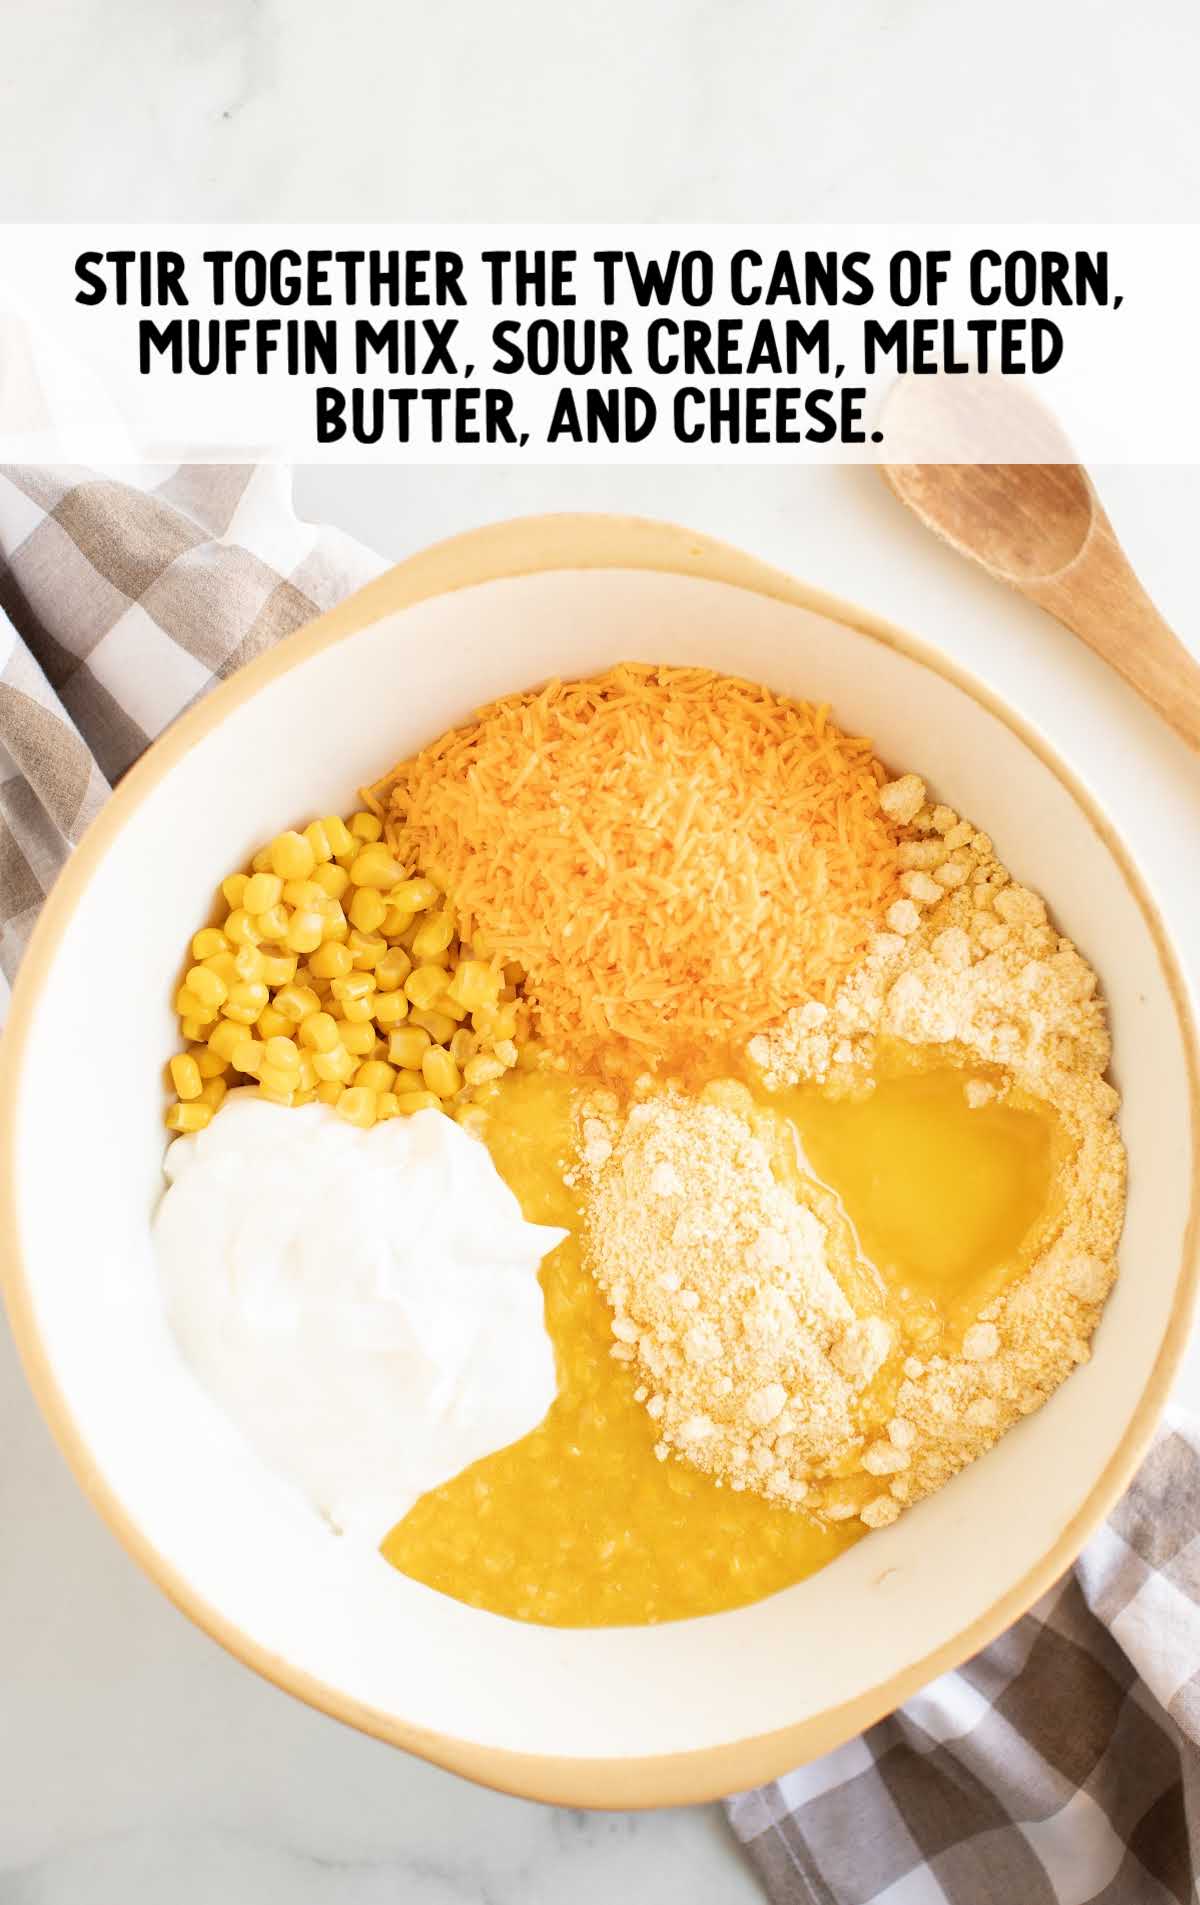 corn, corn muffin mix, sour cream, melted butter, and cheese in a bowl